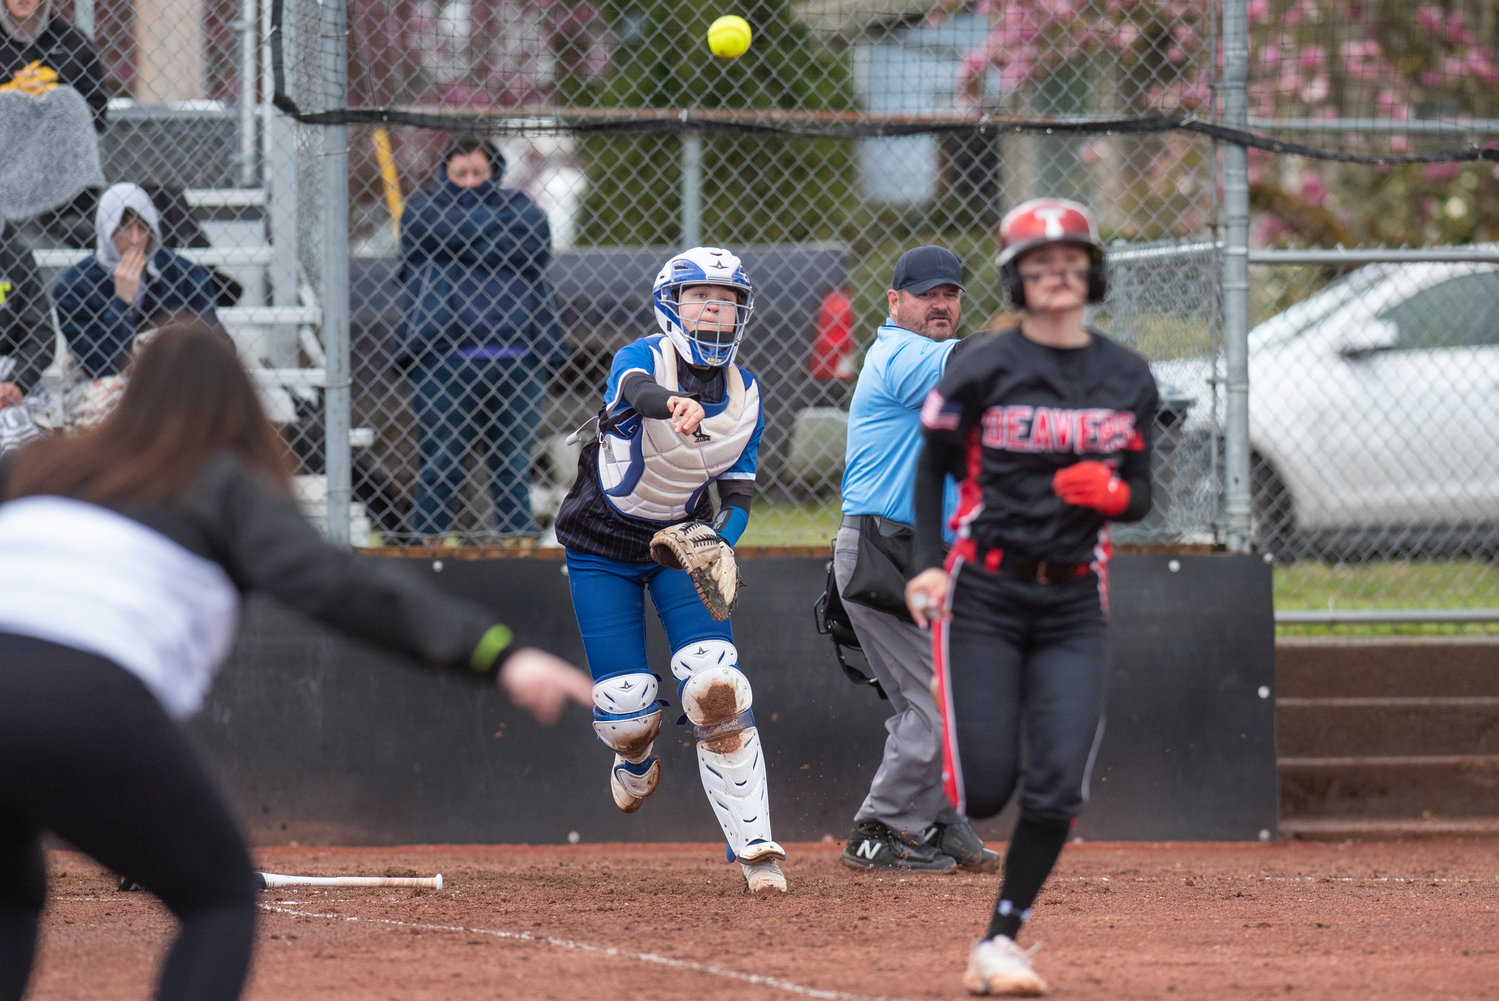 Elma's catcher makes a throw to first as Tenino's Kayla Feltus races to first base after laying down a bunt during a game in Tenino on April 26.